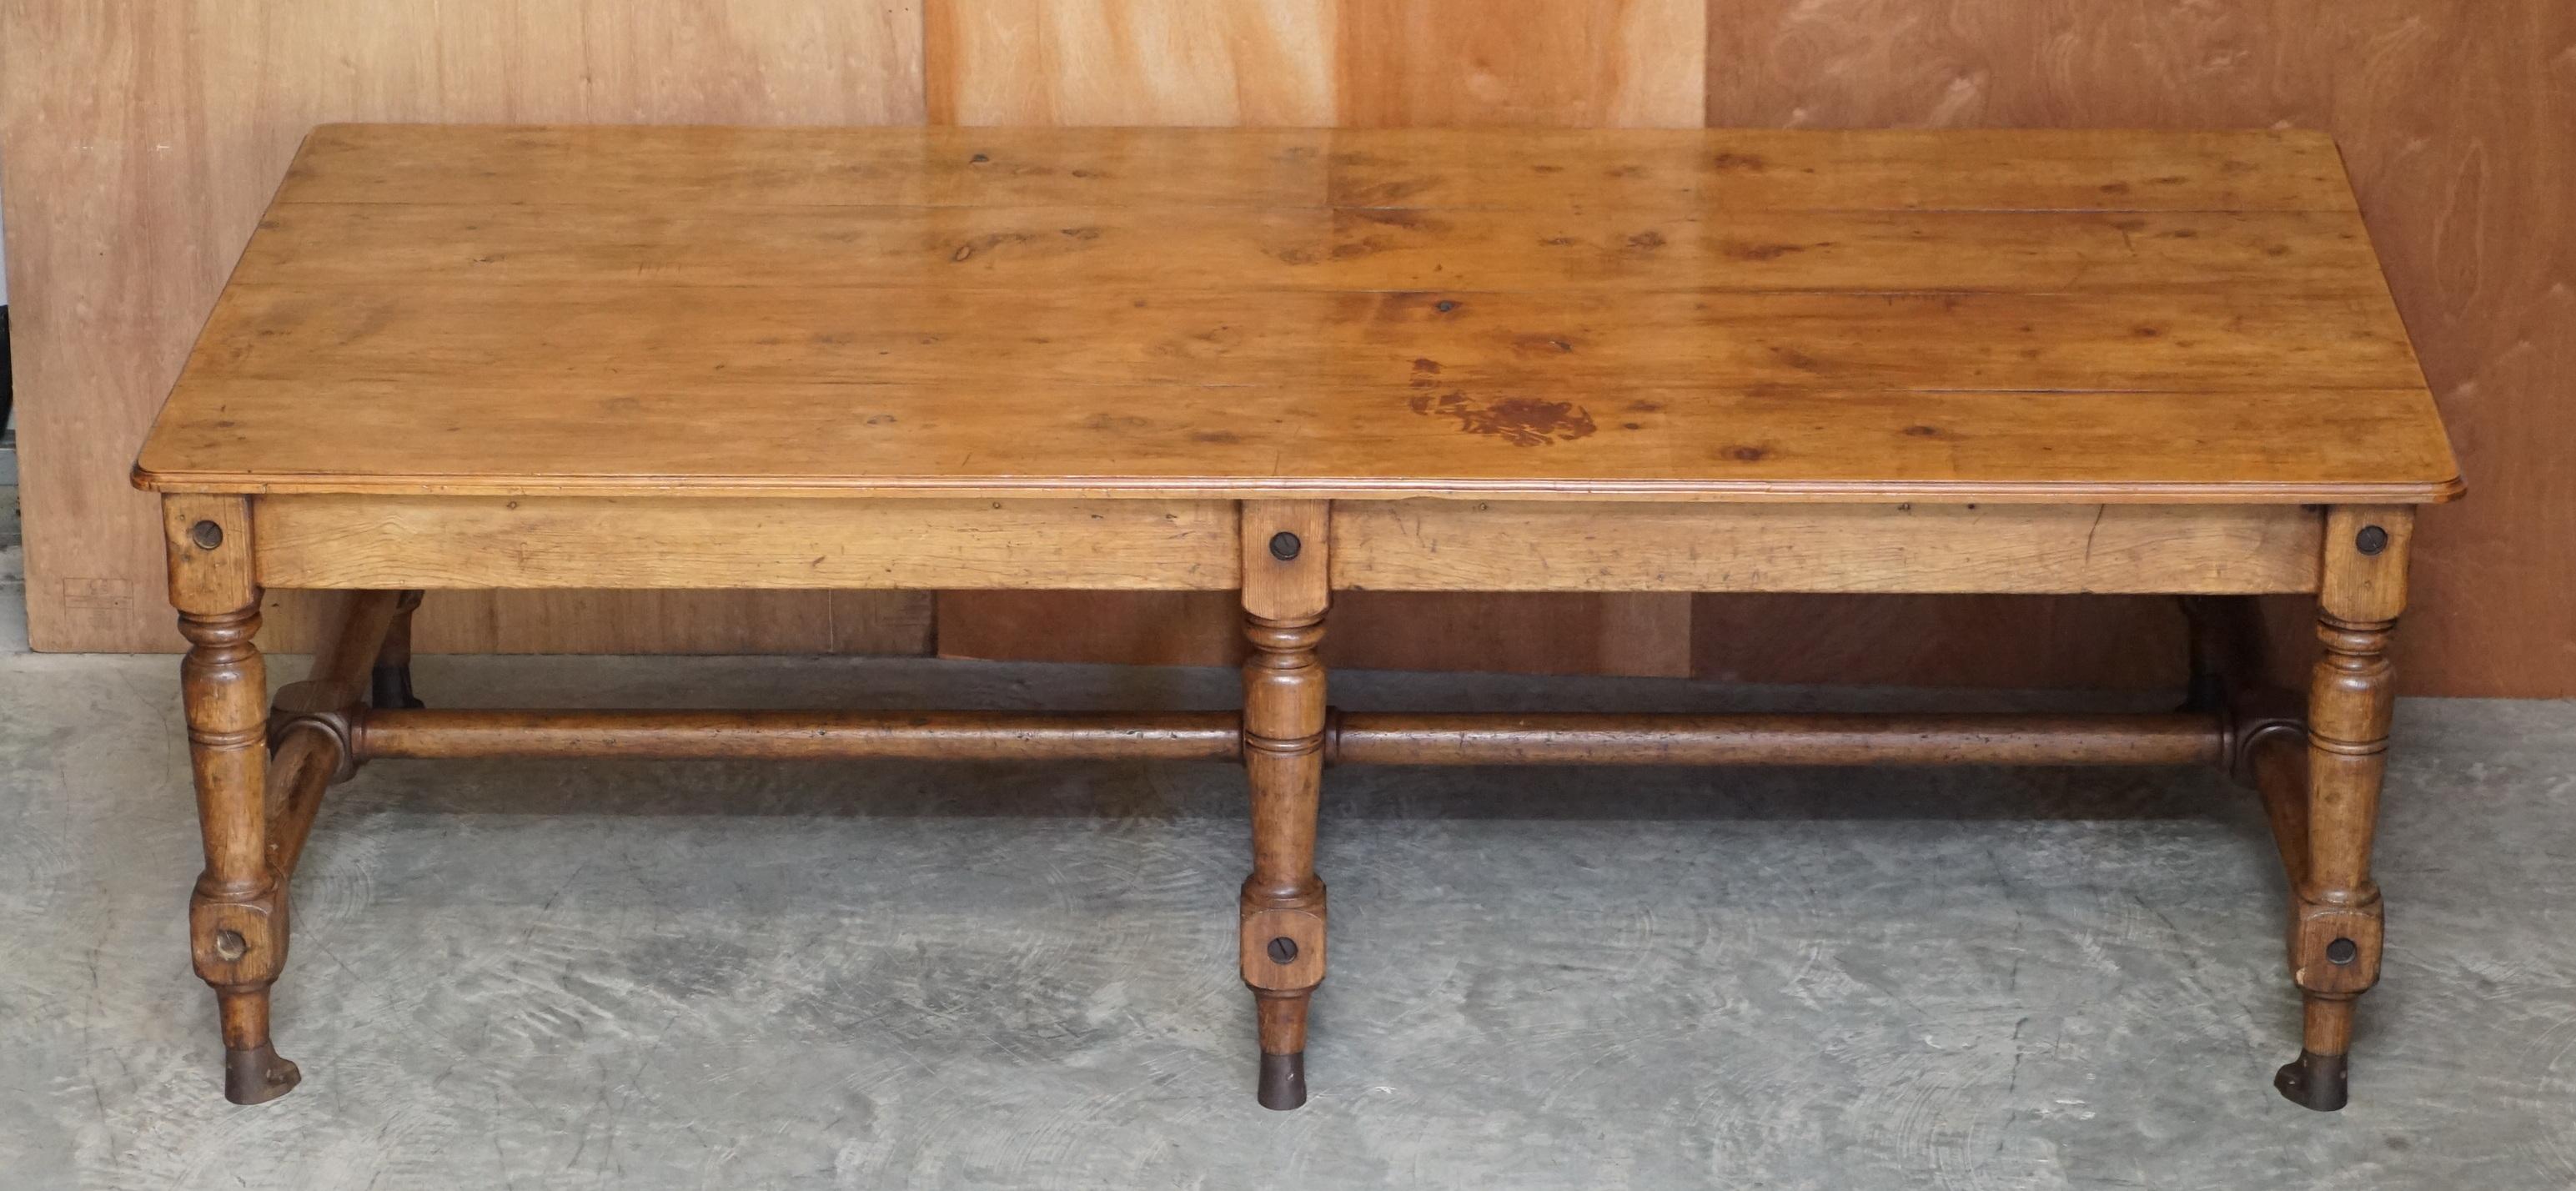 We are delighted to offer for sale this absolutely stunning and very rare original Ships Pitch Pine Refectory dining table with Phosphor Bronze feet and fittings

A truly sublime piece, I have never seen another genuine ship table of this size